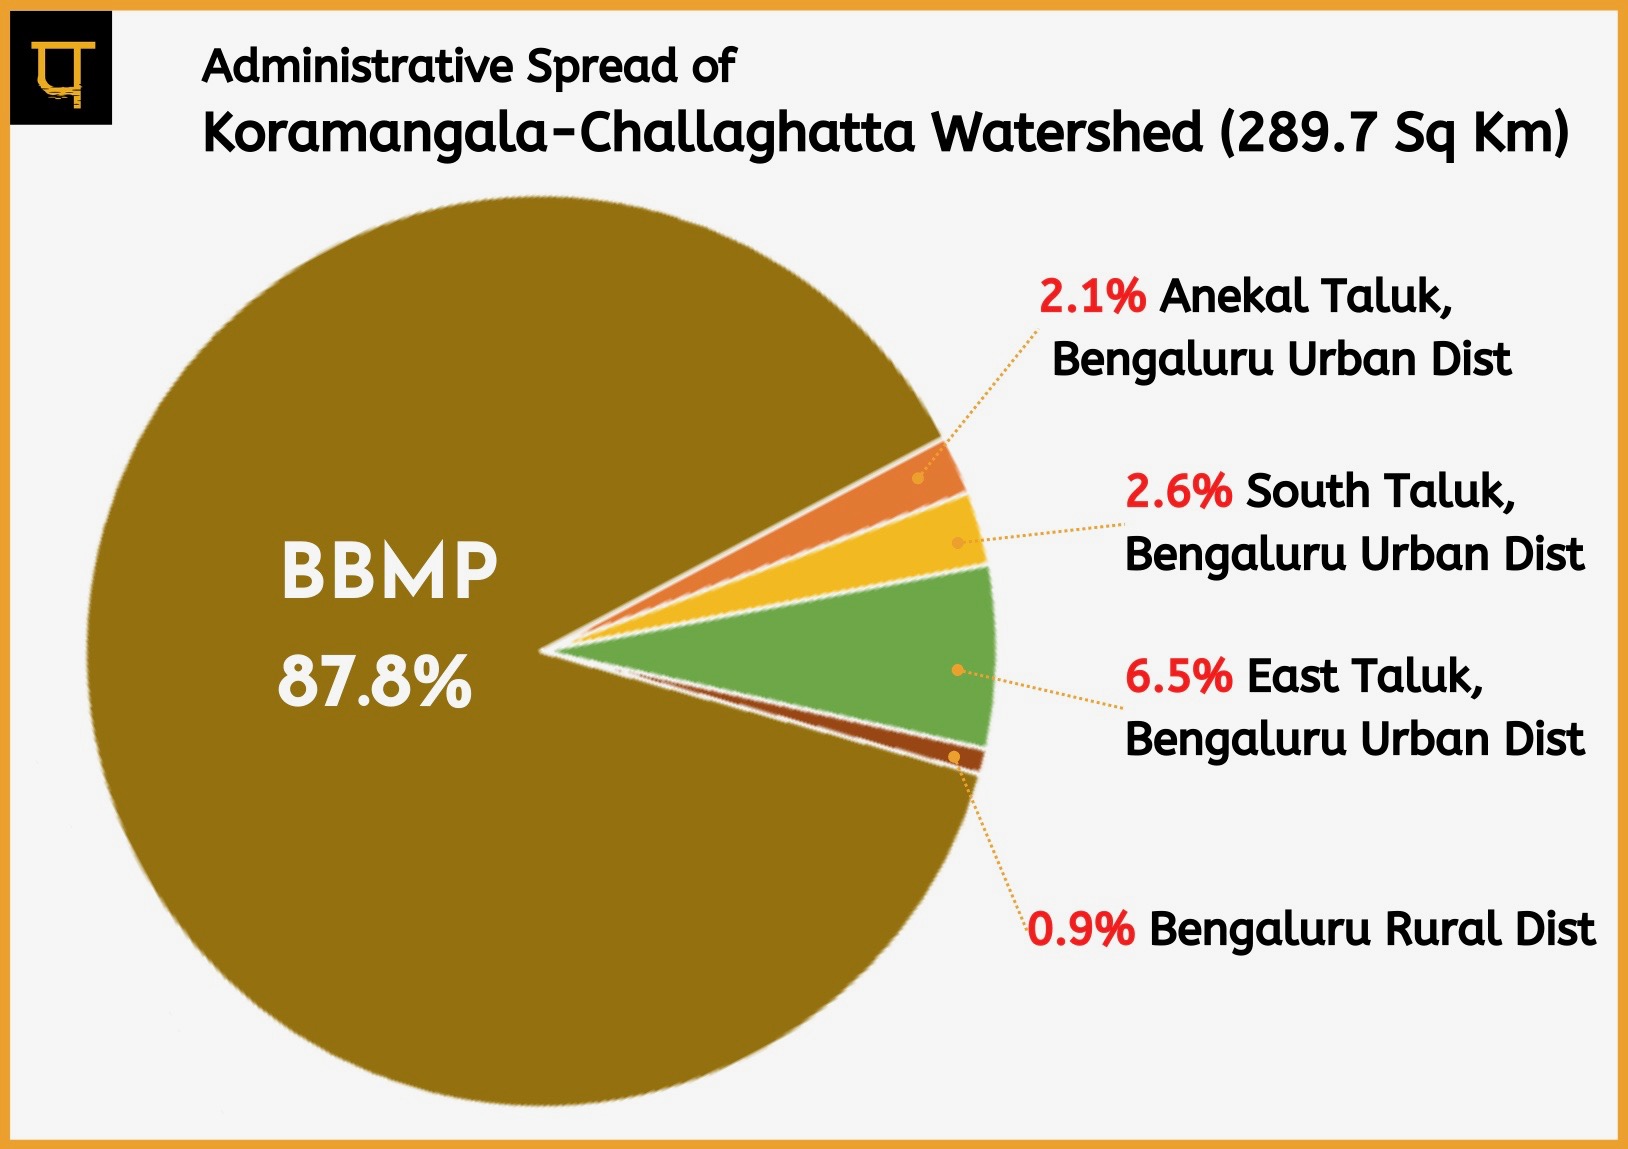 Adminstrative Spread of the Watershed